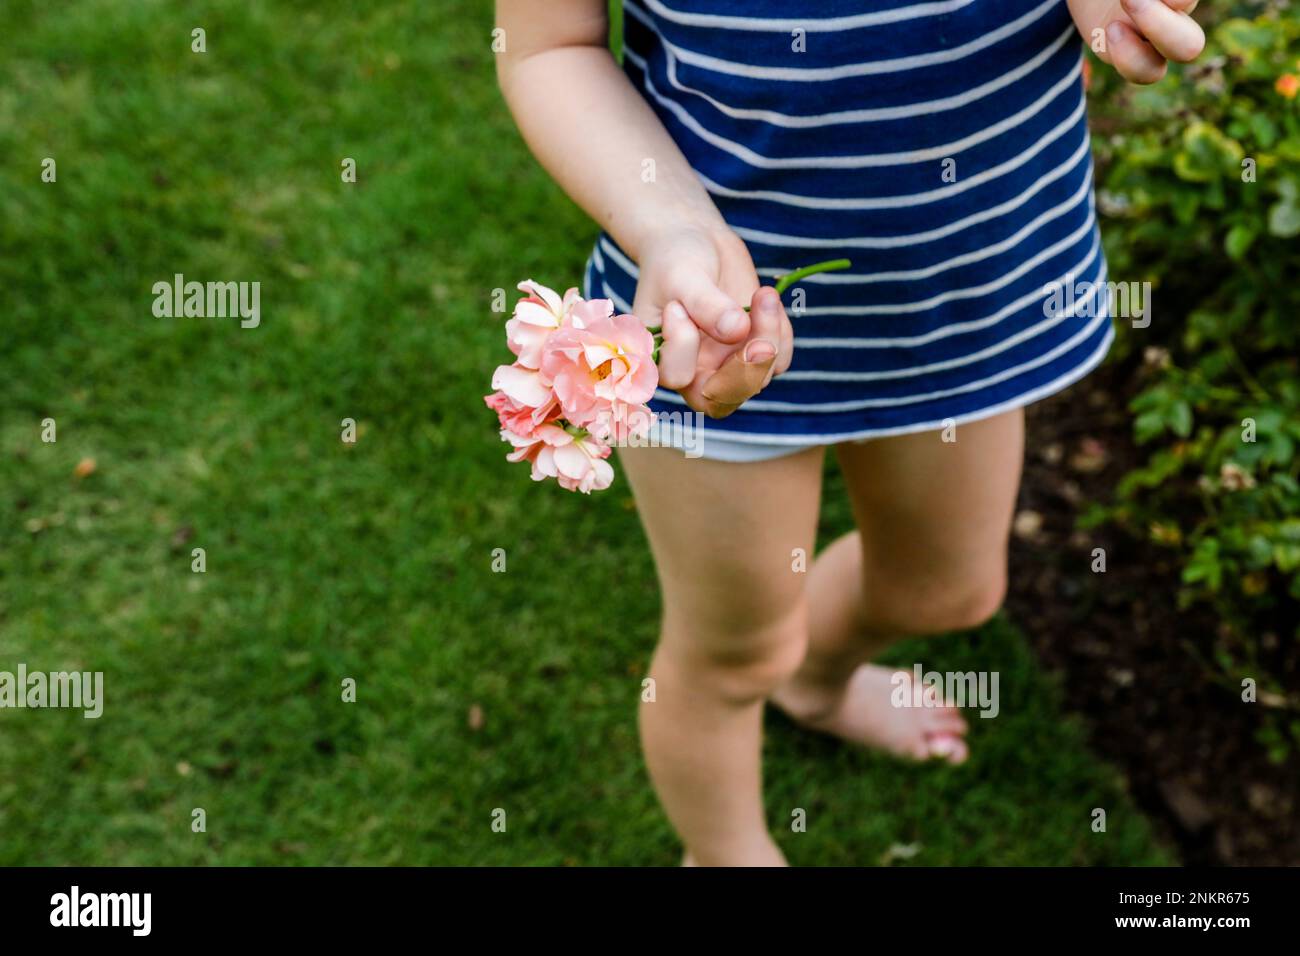 Young girl holding freshly picked flowers in hand Stock Photo